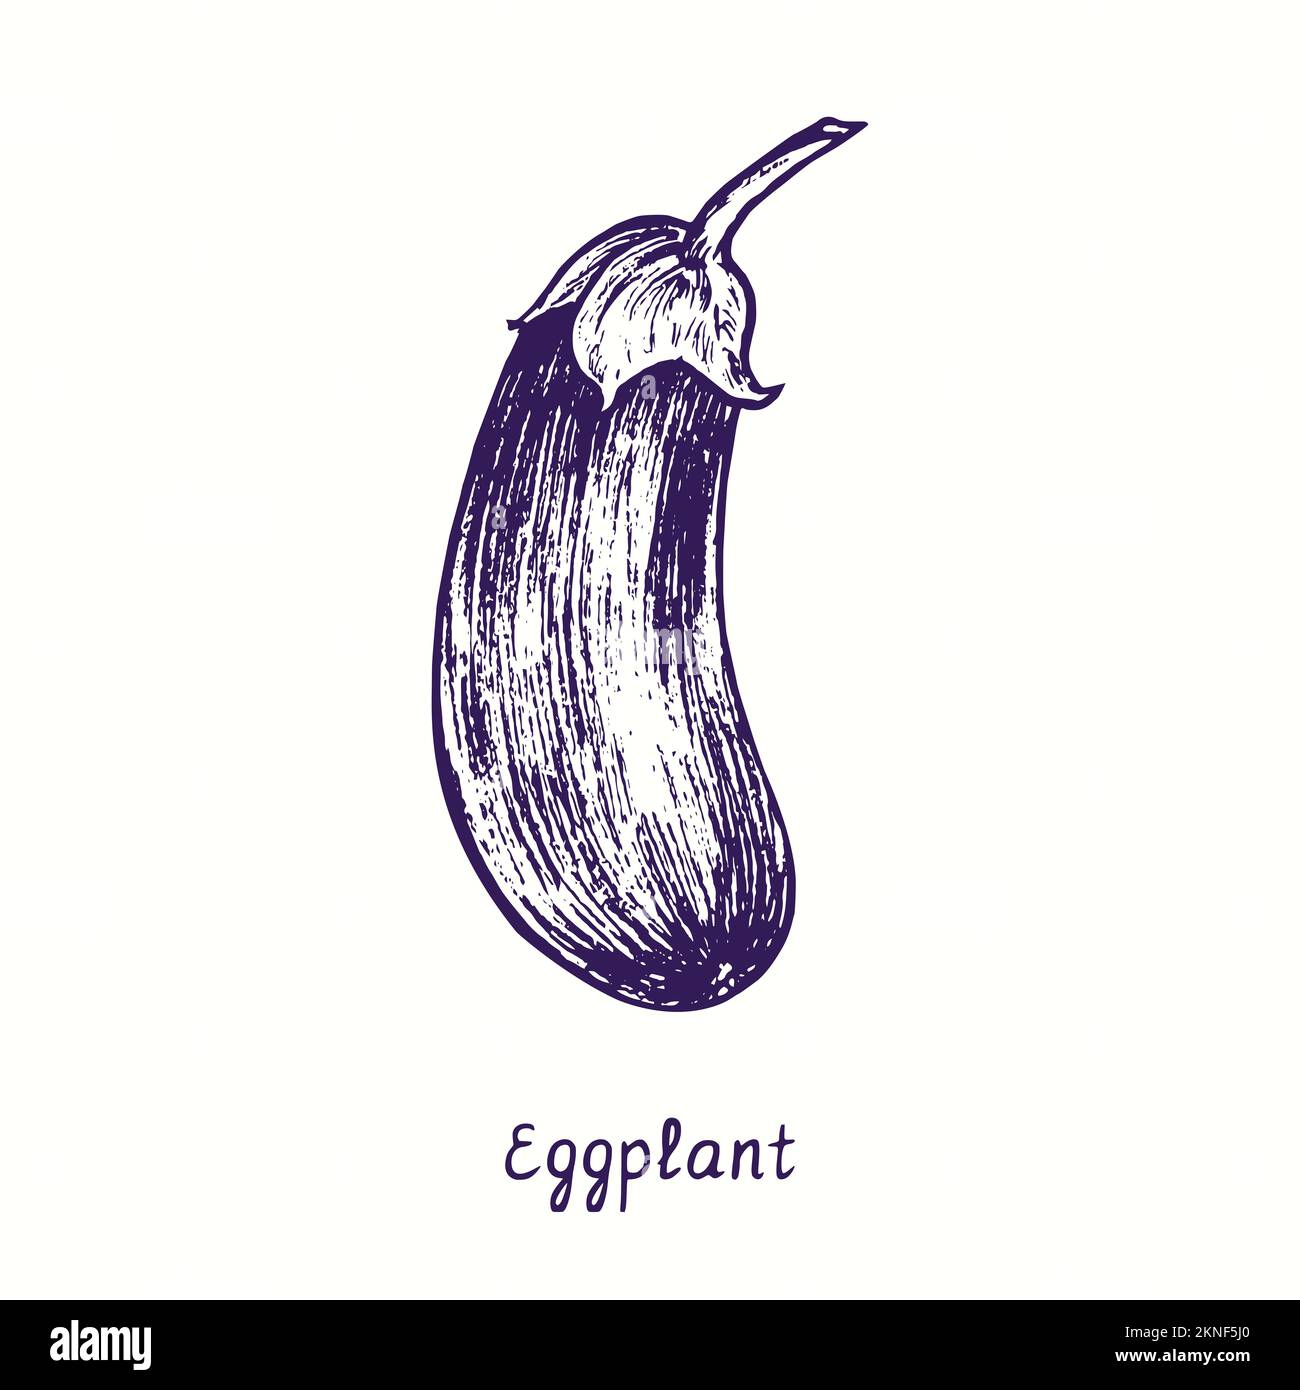 Eggplant whole. Ink black and white doodle drawing in woodcut style Stock Photo